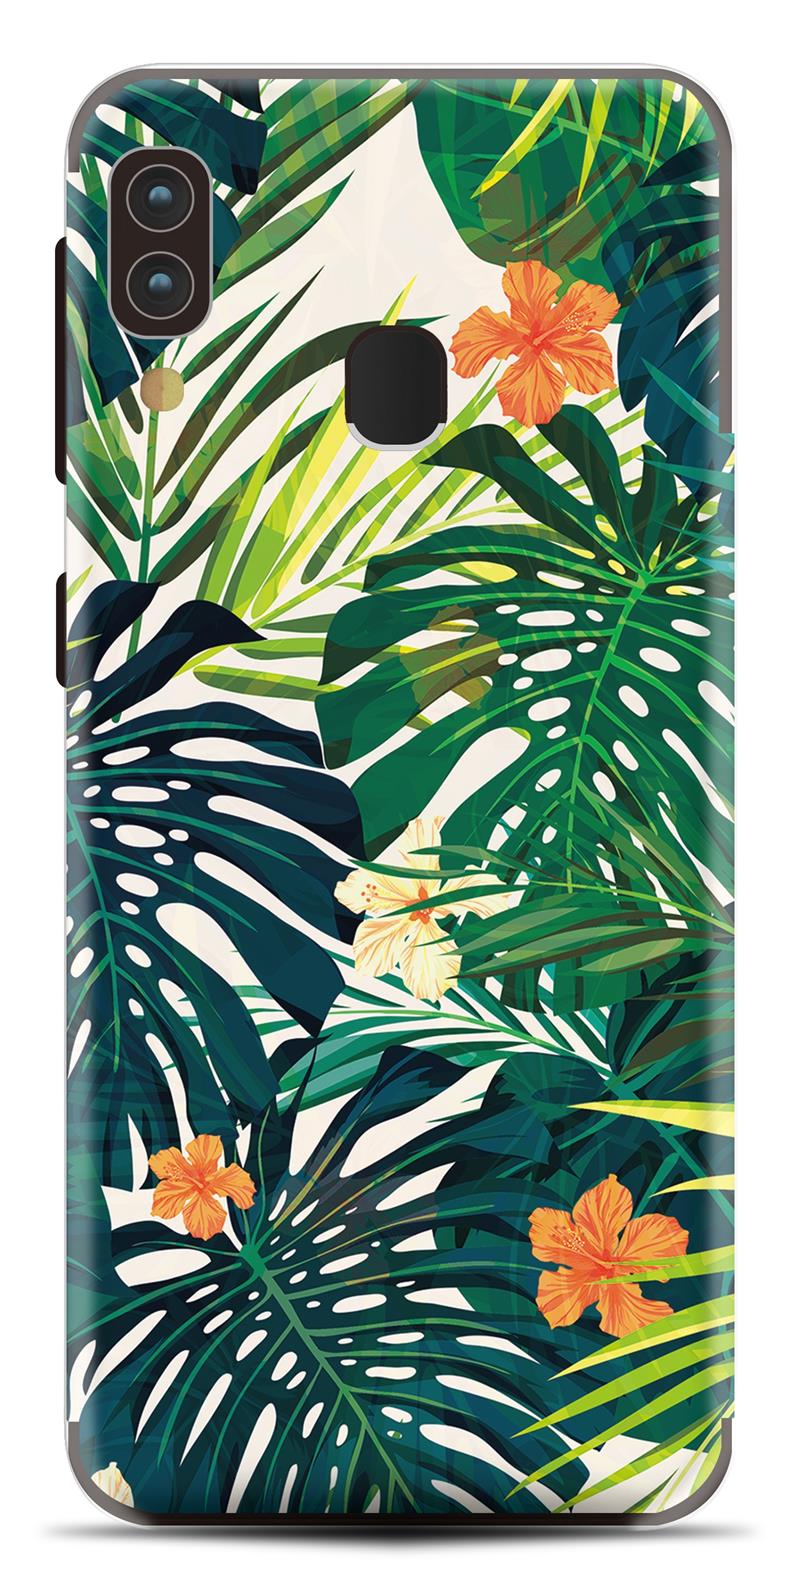 My Style PhoneSkin For Samsung Galaxy A20e Jungle Flowers